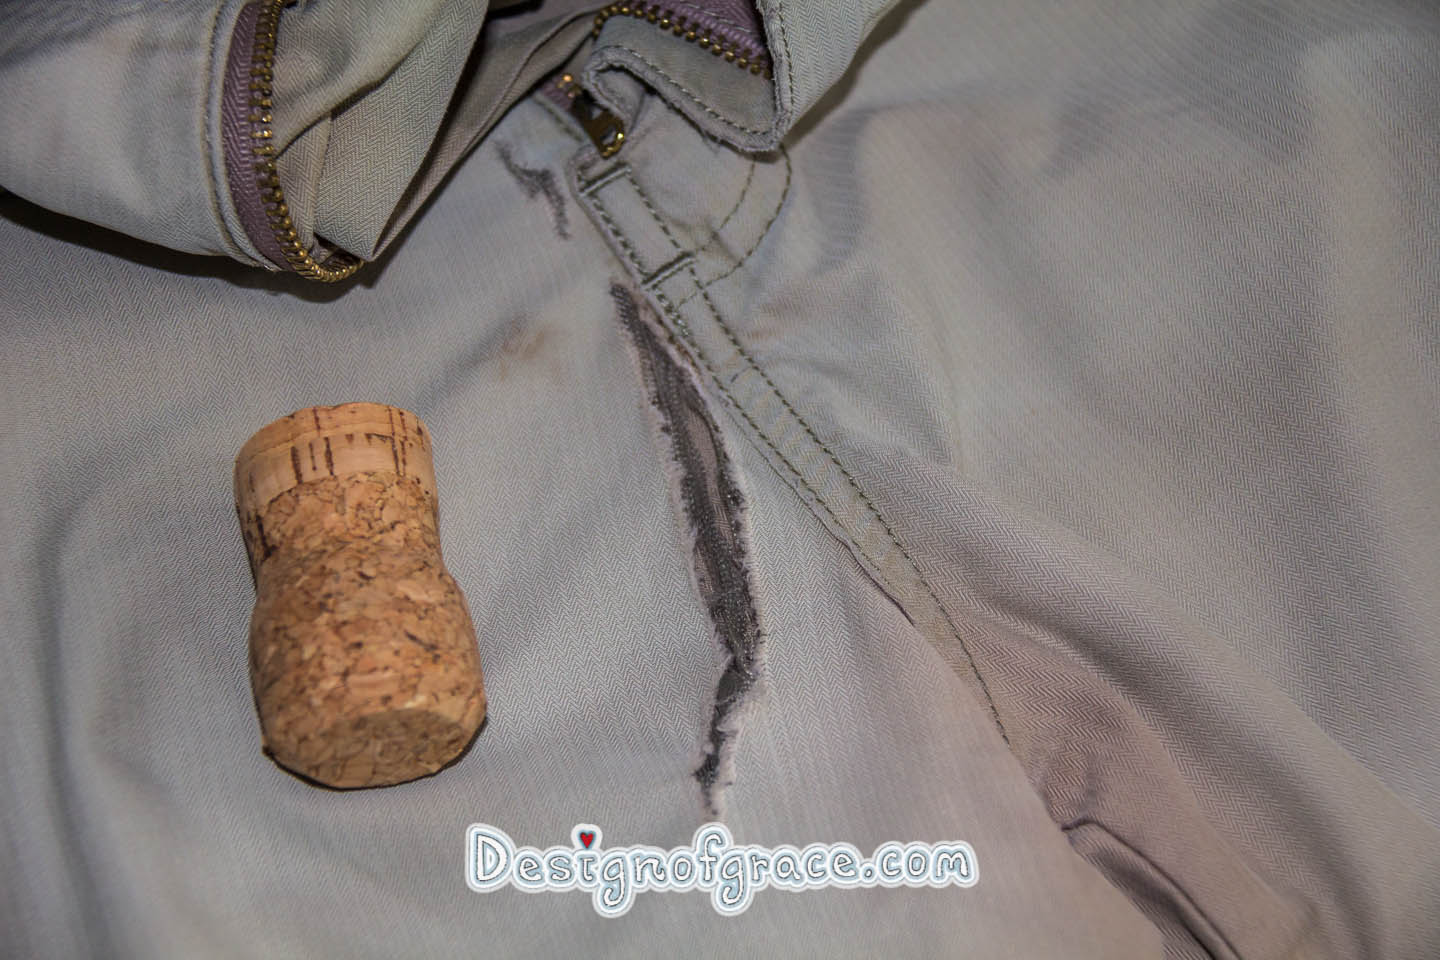 Photo of a ripped pants in the front, cork use to show the size of the rip